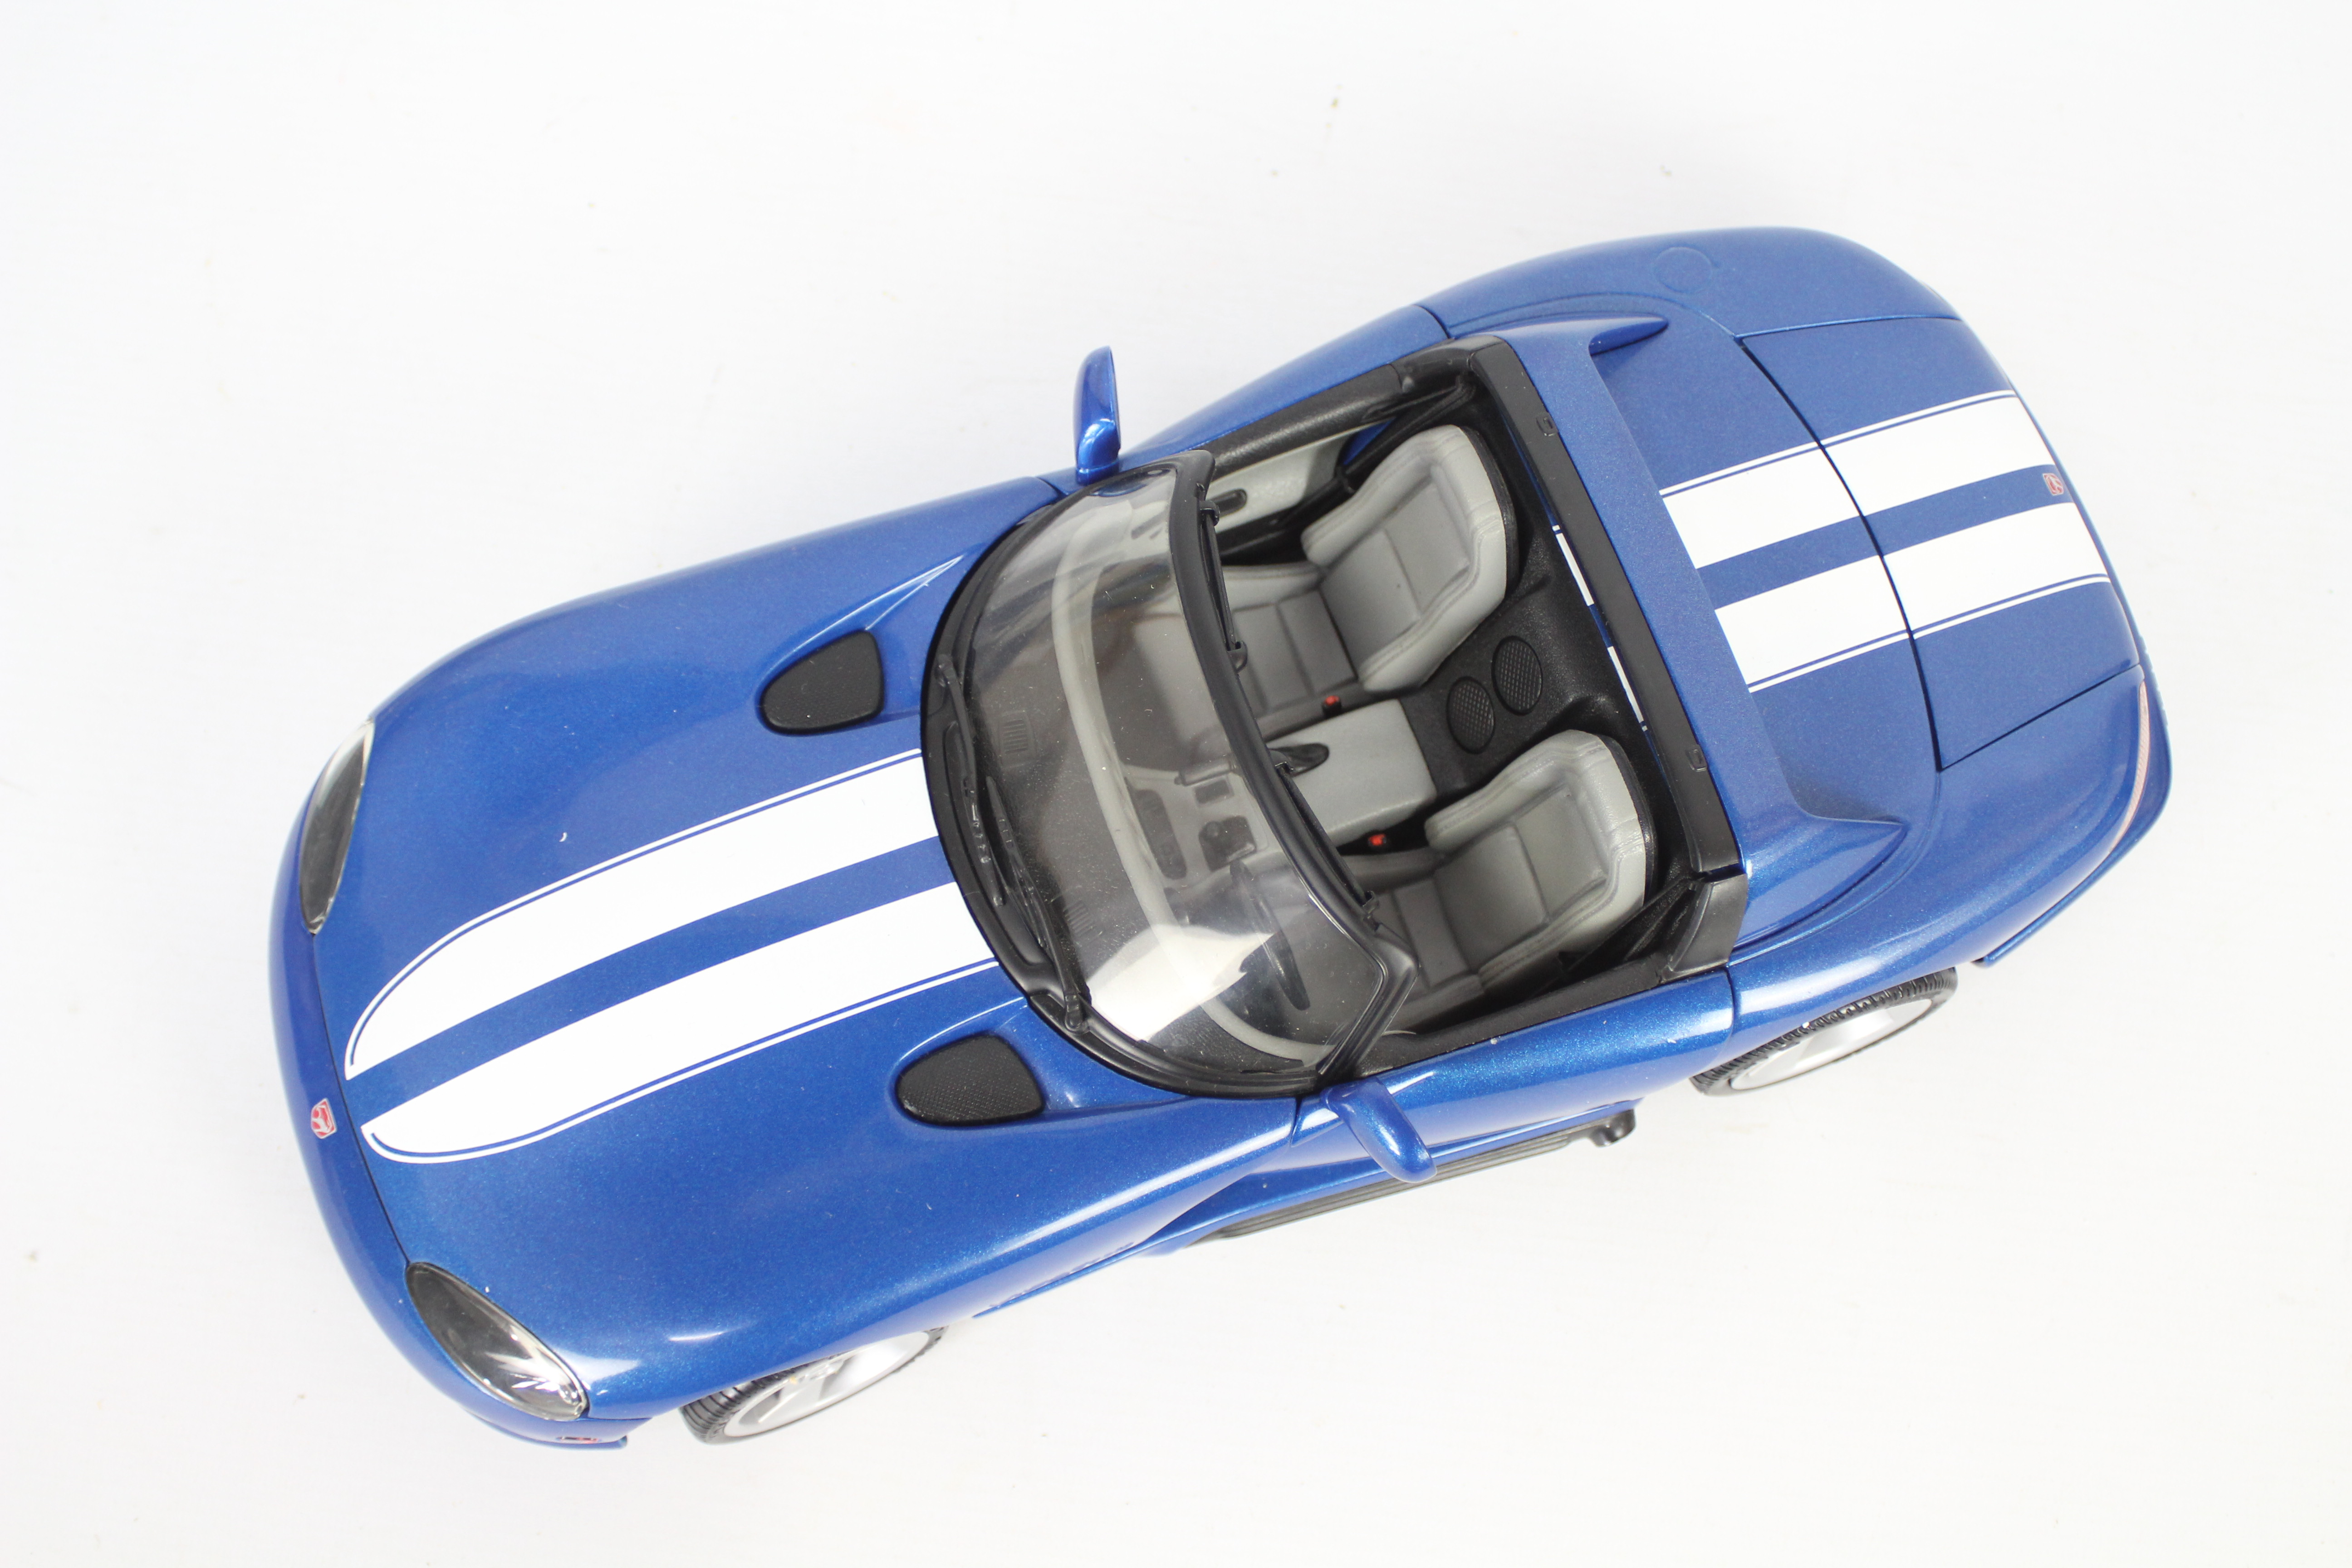 Anson - A boxed Limited Edition 1:12 scale Dodge Viper RT/10 by Anson. - Image 2 of 5